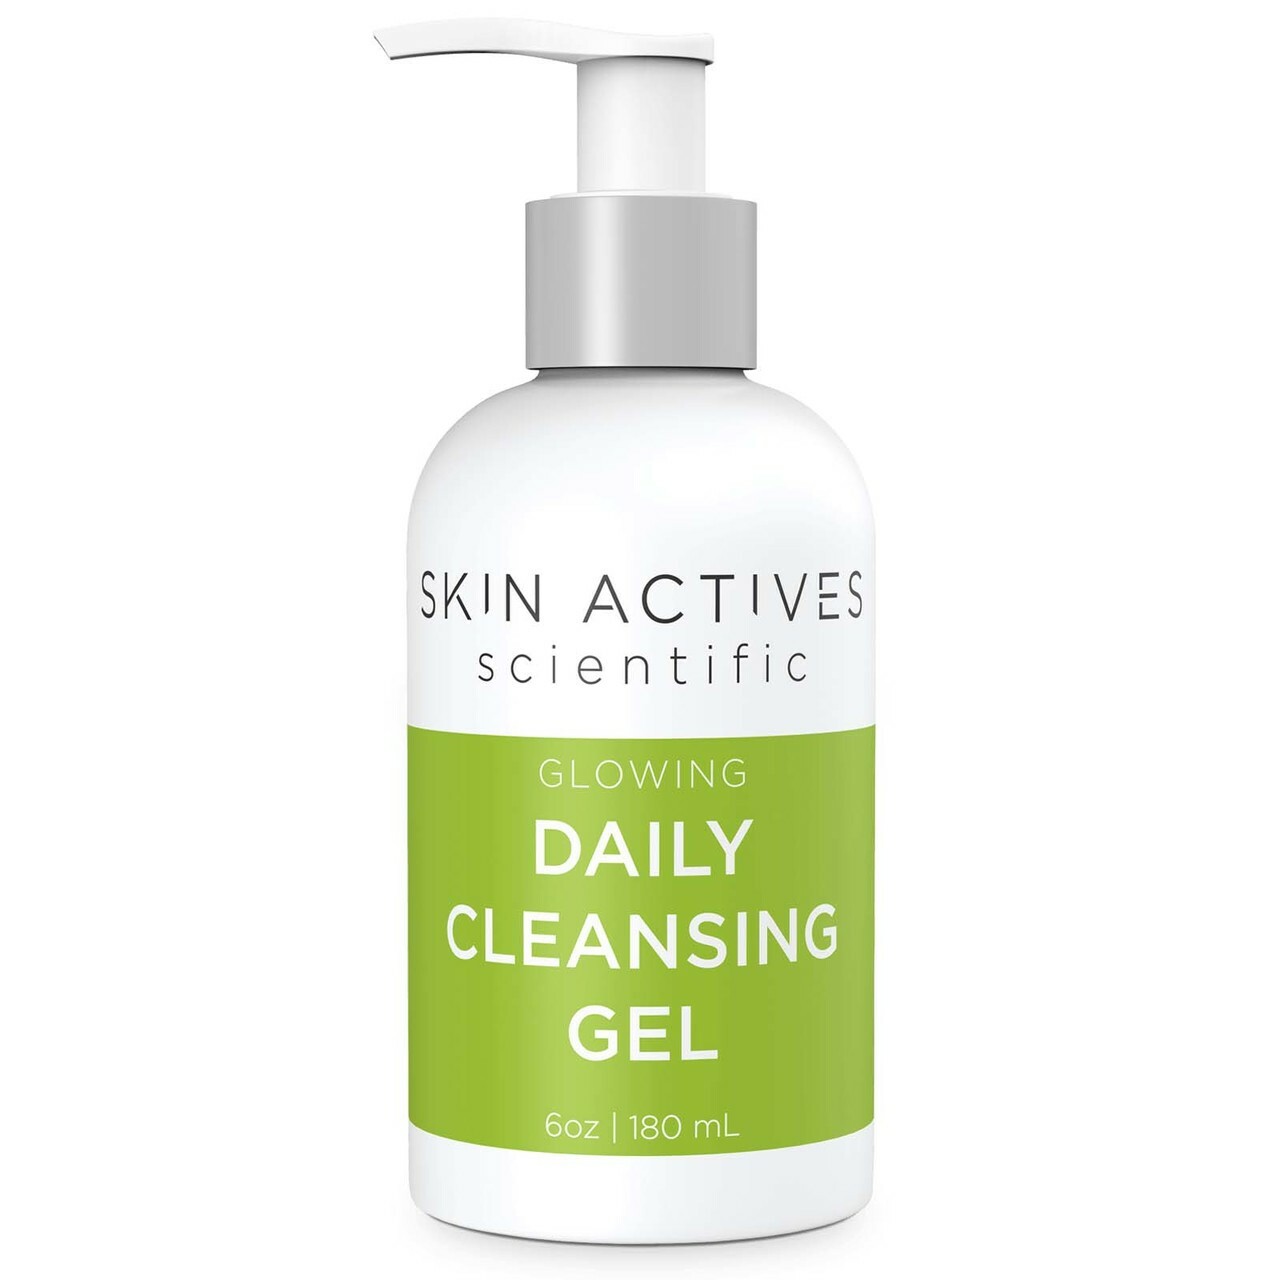 Facial Cleanser - Oily & Dry Skin Control - Skin Actives - 6.0 oz.